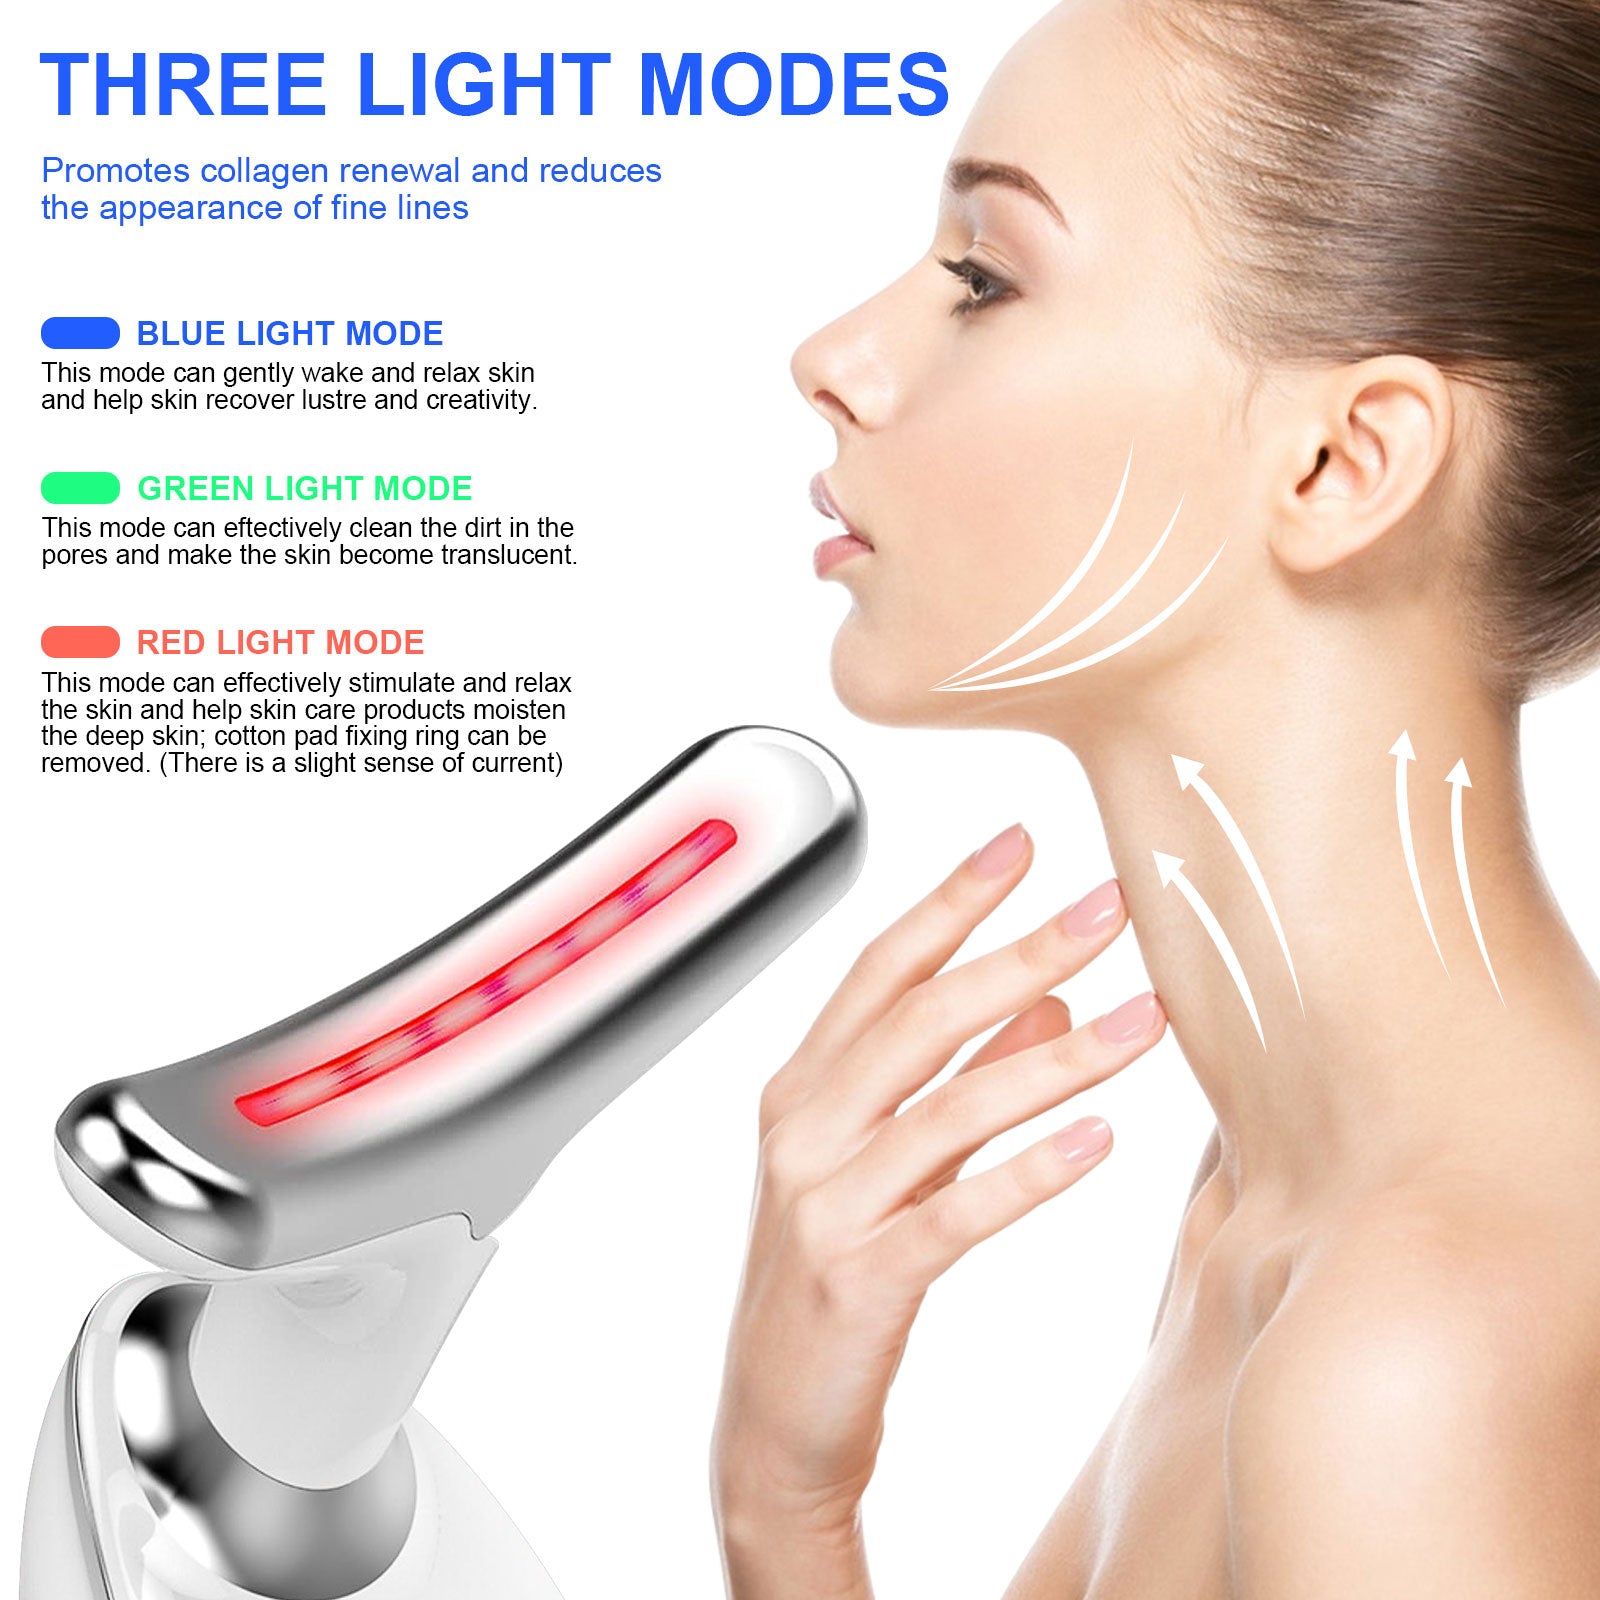  Anti Wrinkles Face Massager for Facial and Neck, Face